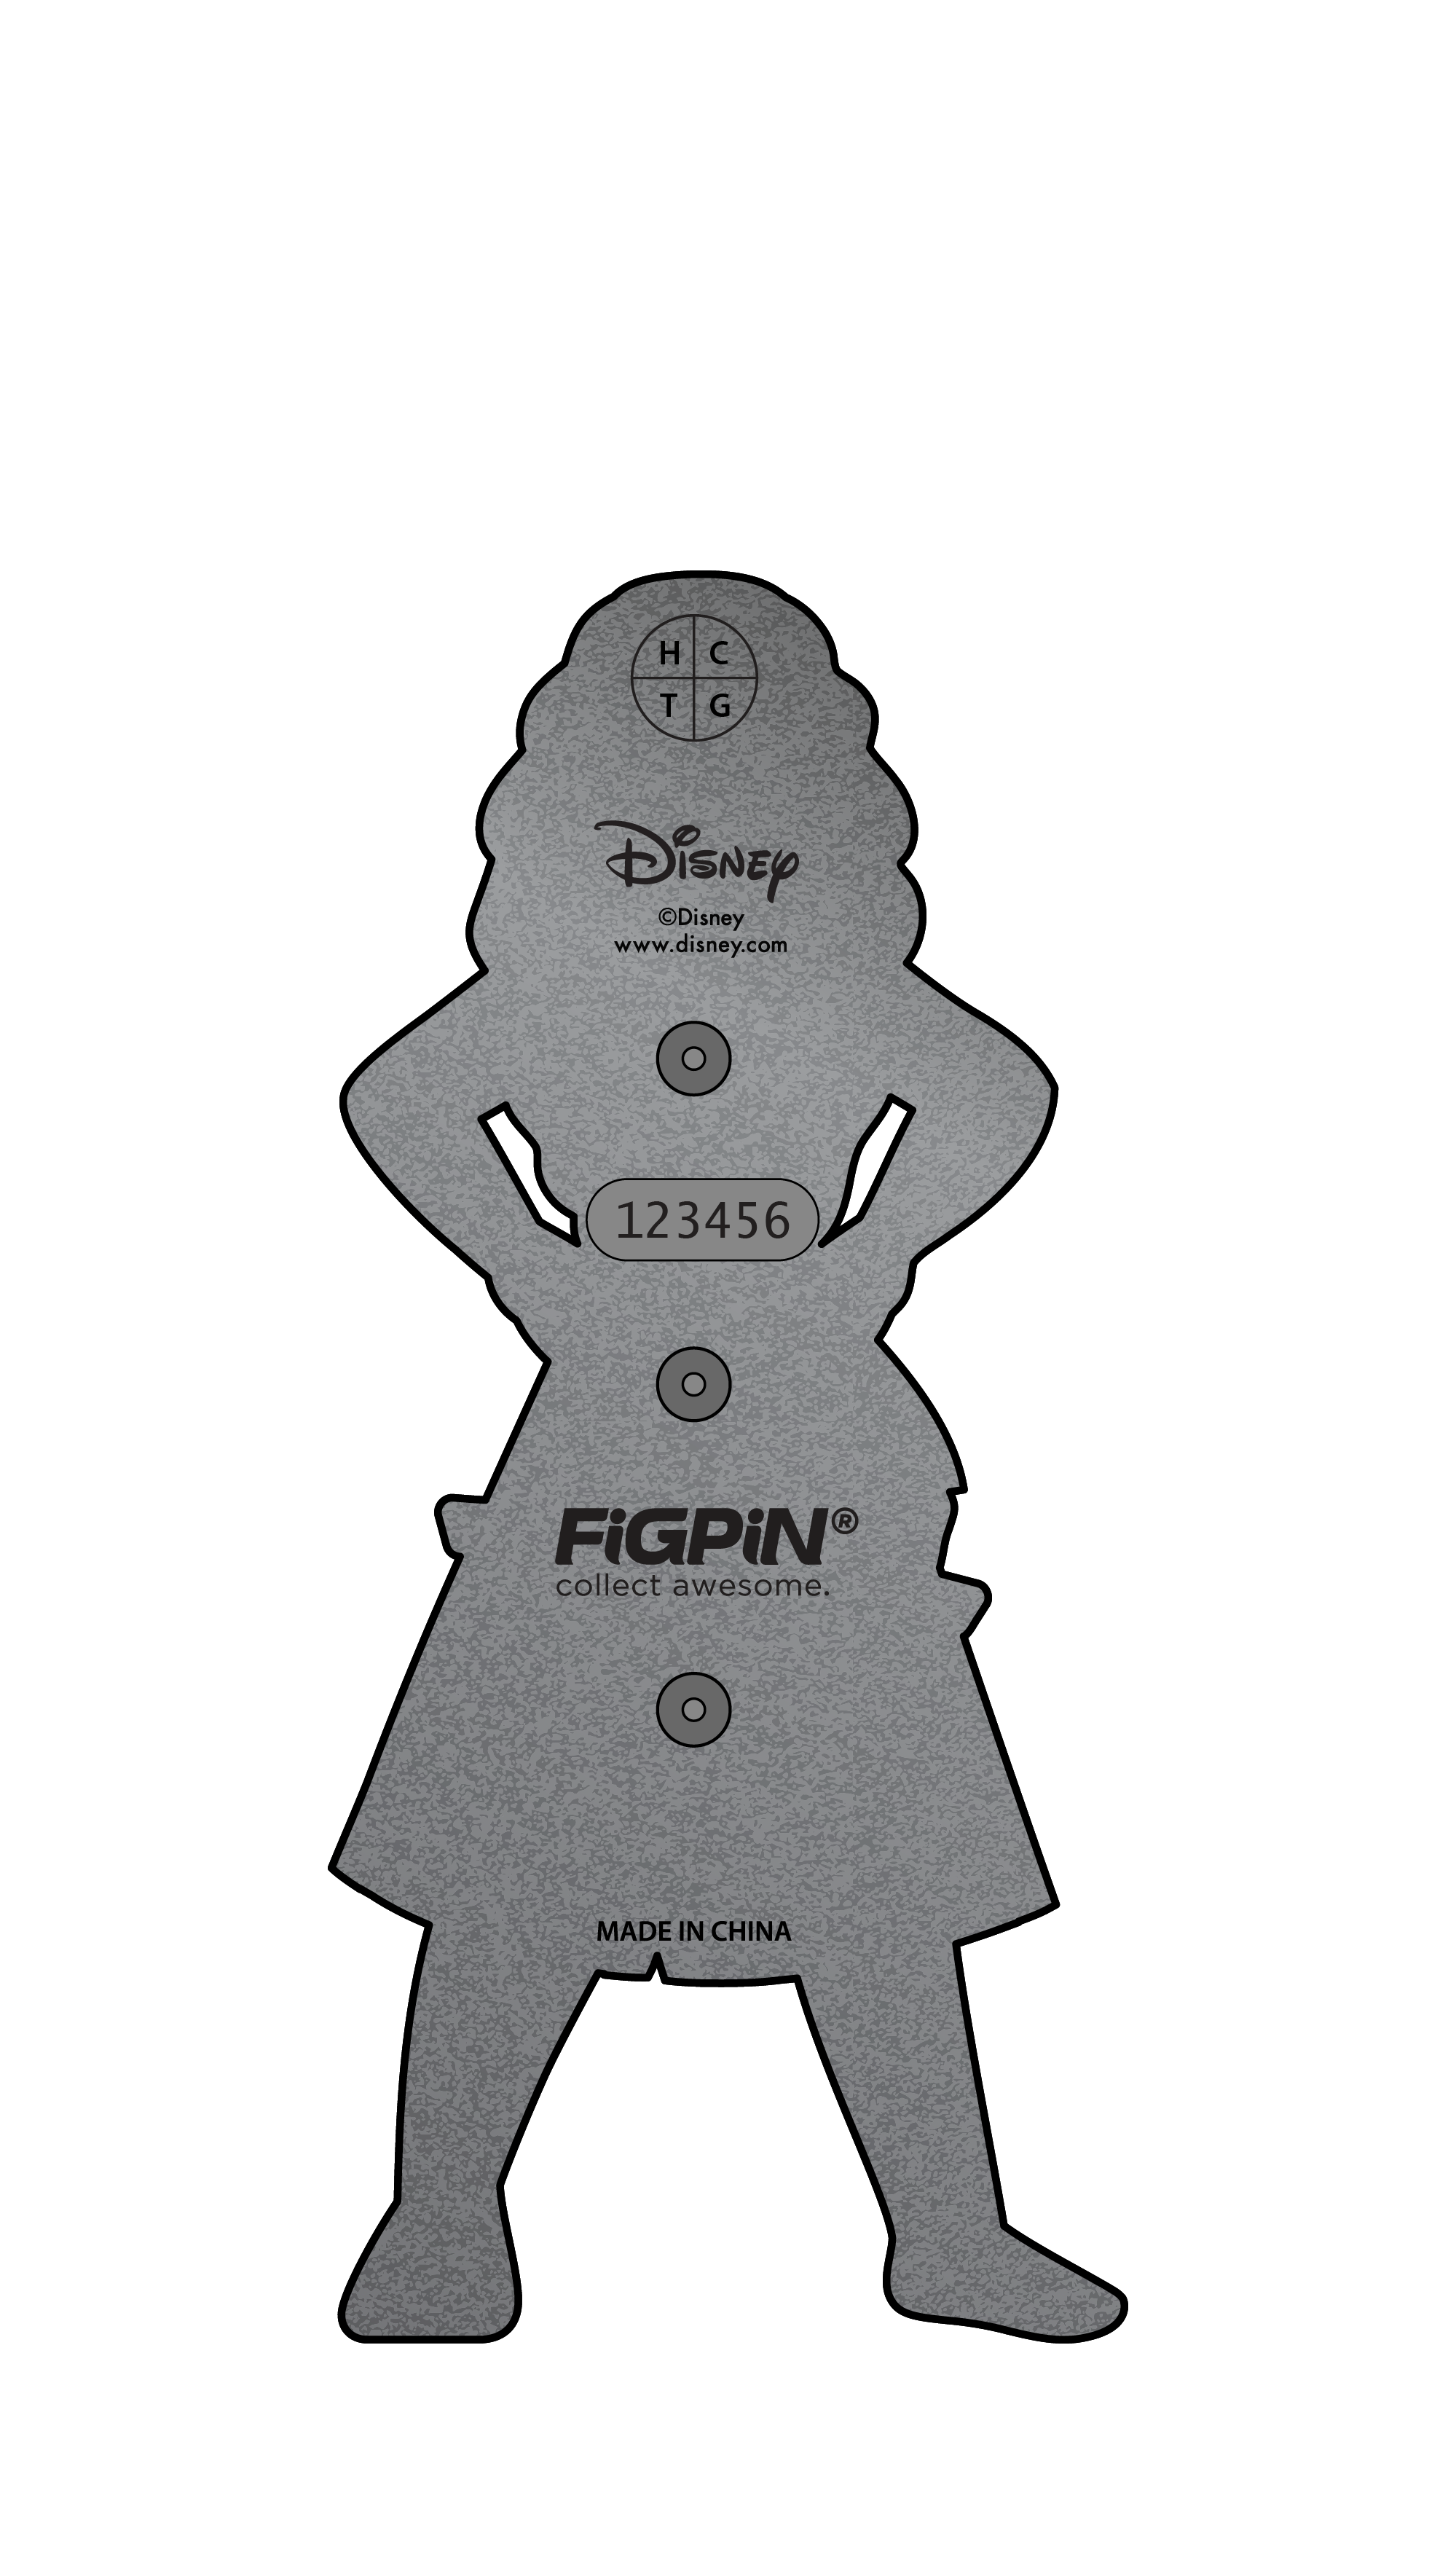 Back render of enamel pin with example FiGPiN serial number.